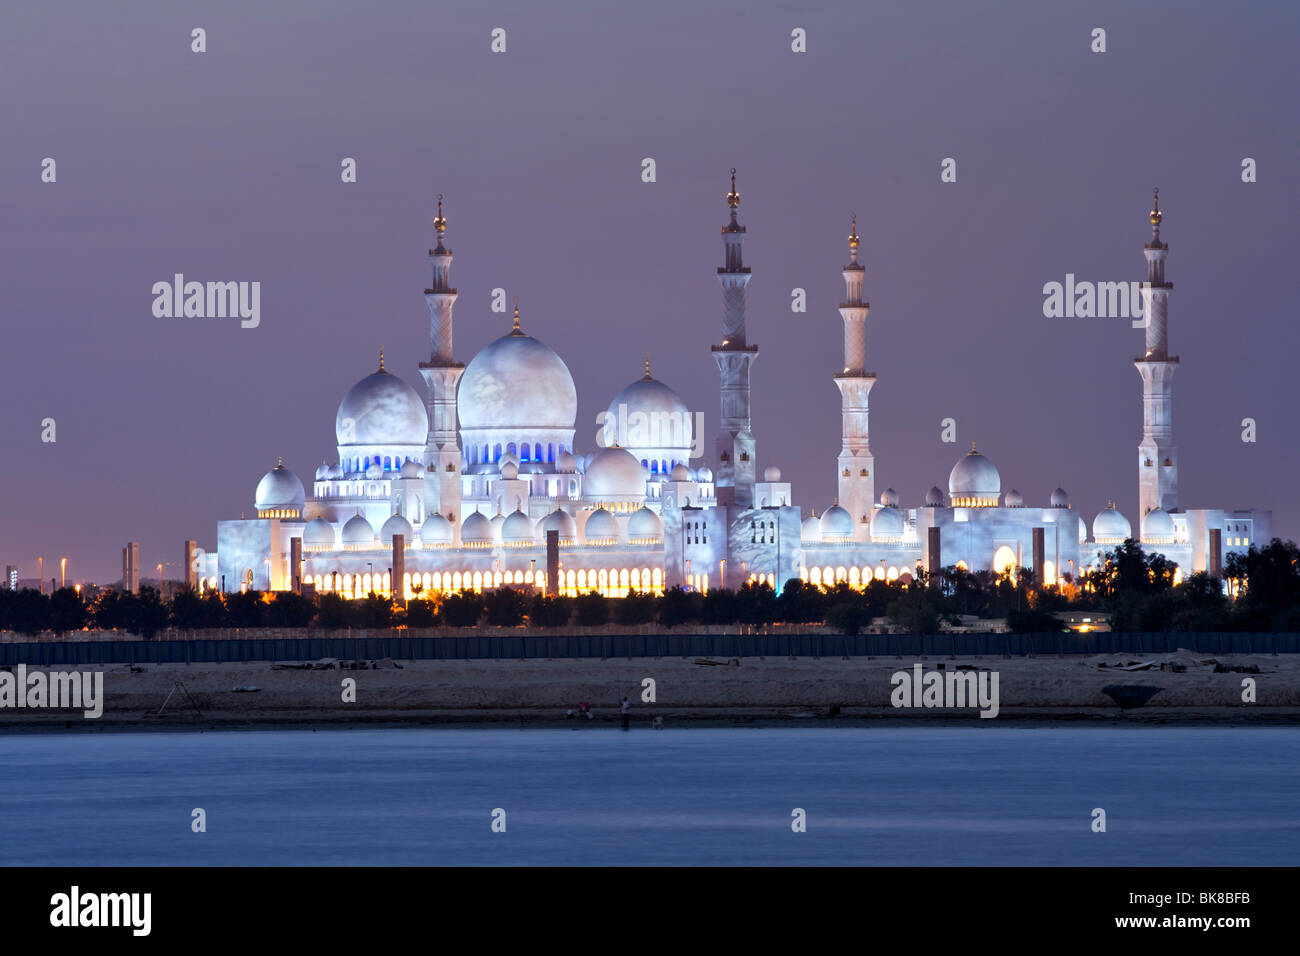 Dusk view of the Sheikh Zayed Grand Mosque in Abu Dhabi, capital of the United Arab Emirates. Stock Photo